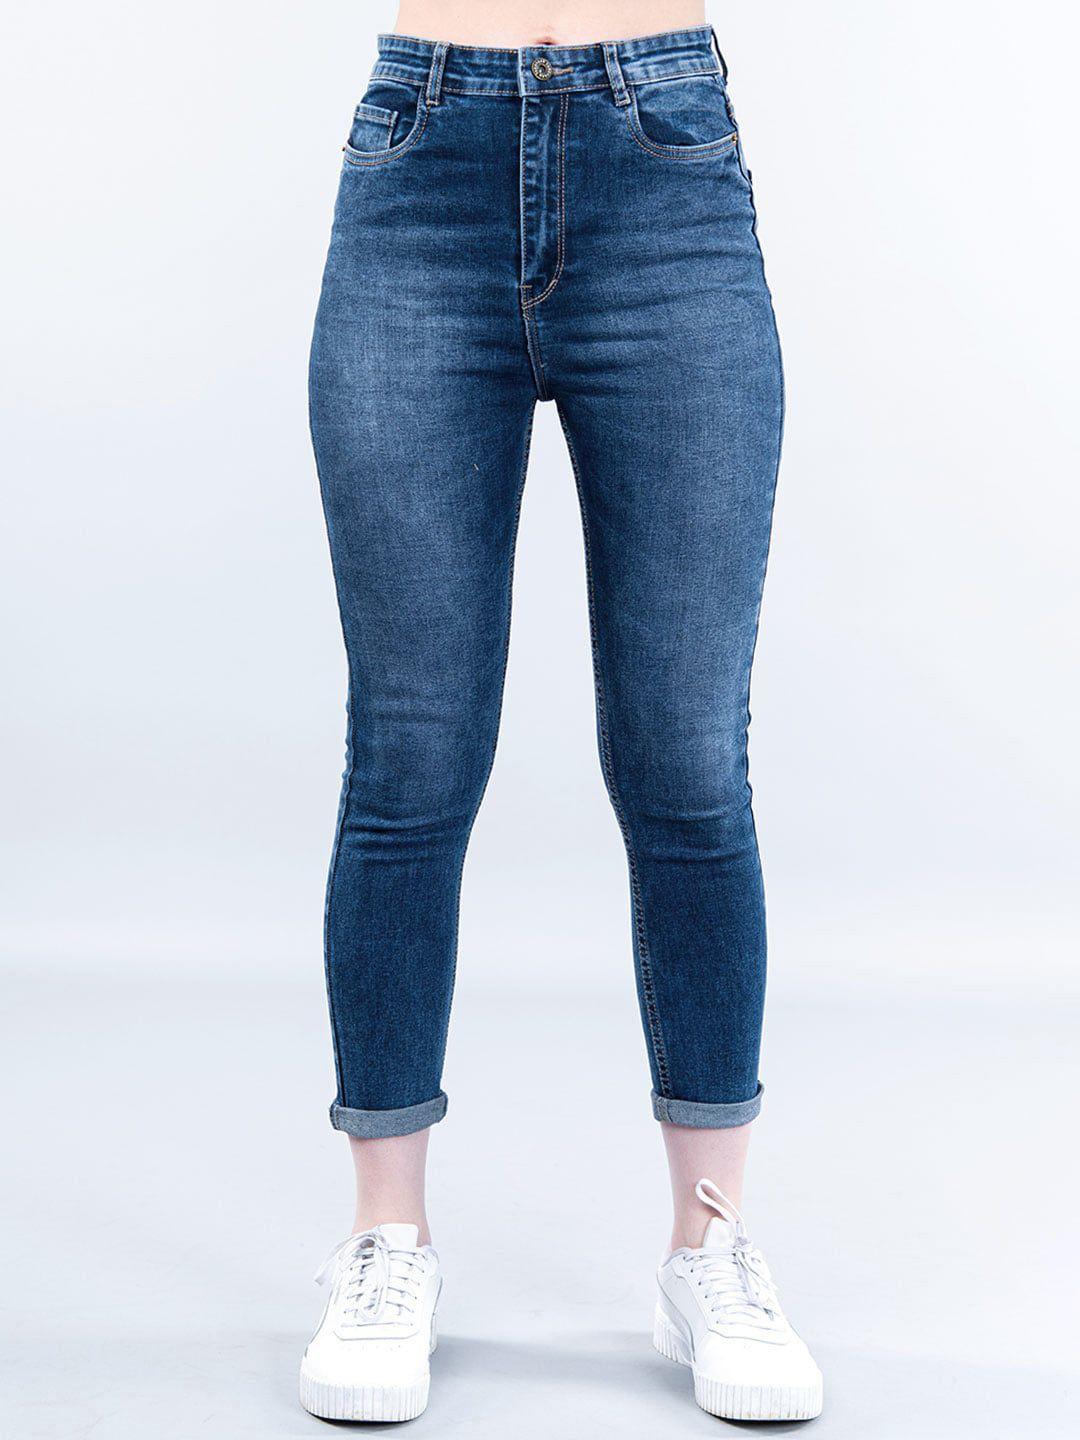 tistabene-women-comfort-skinny-fit-clean-look-heavy-fade-stretchable-jeans